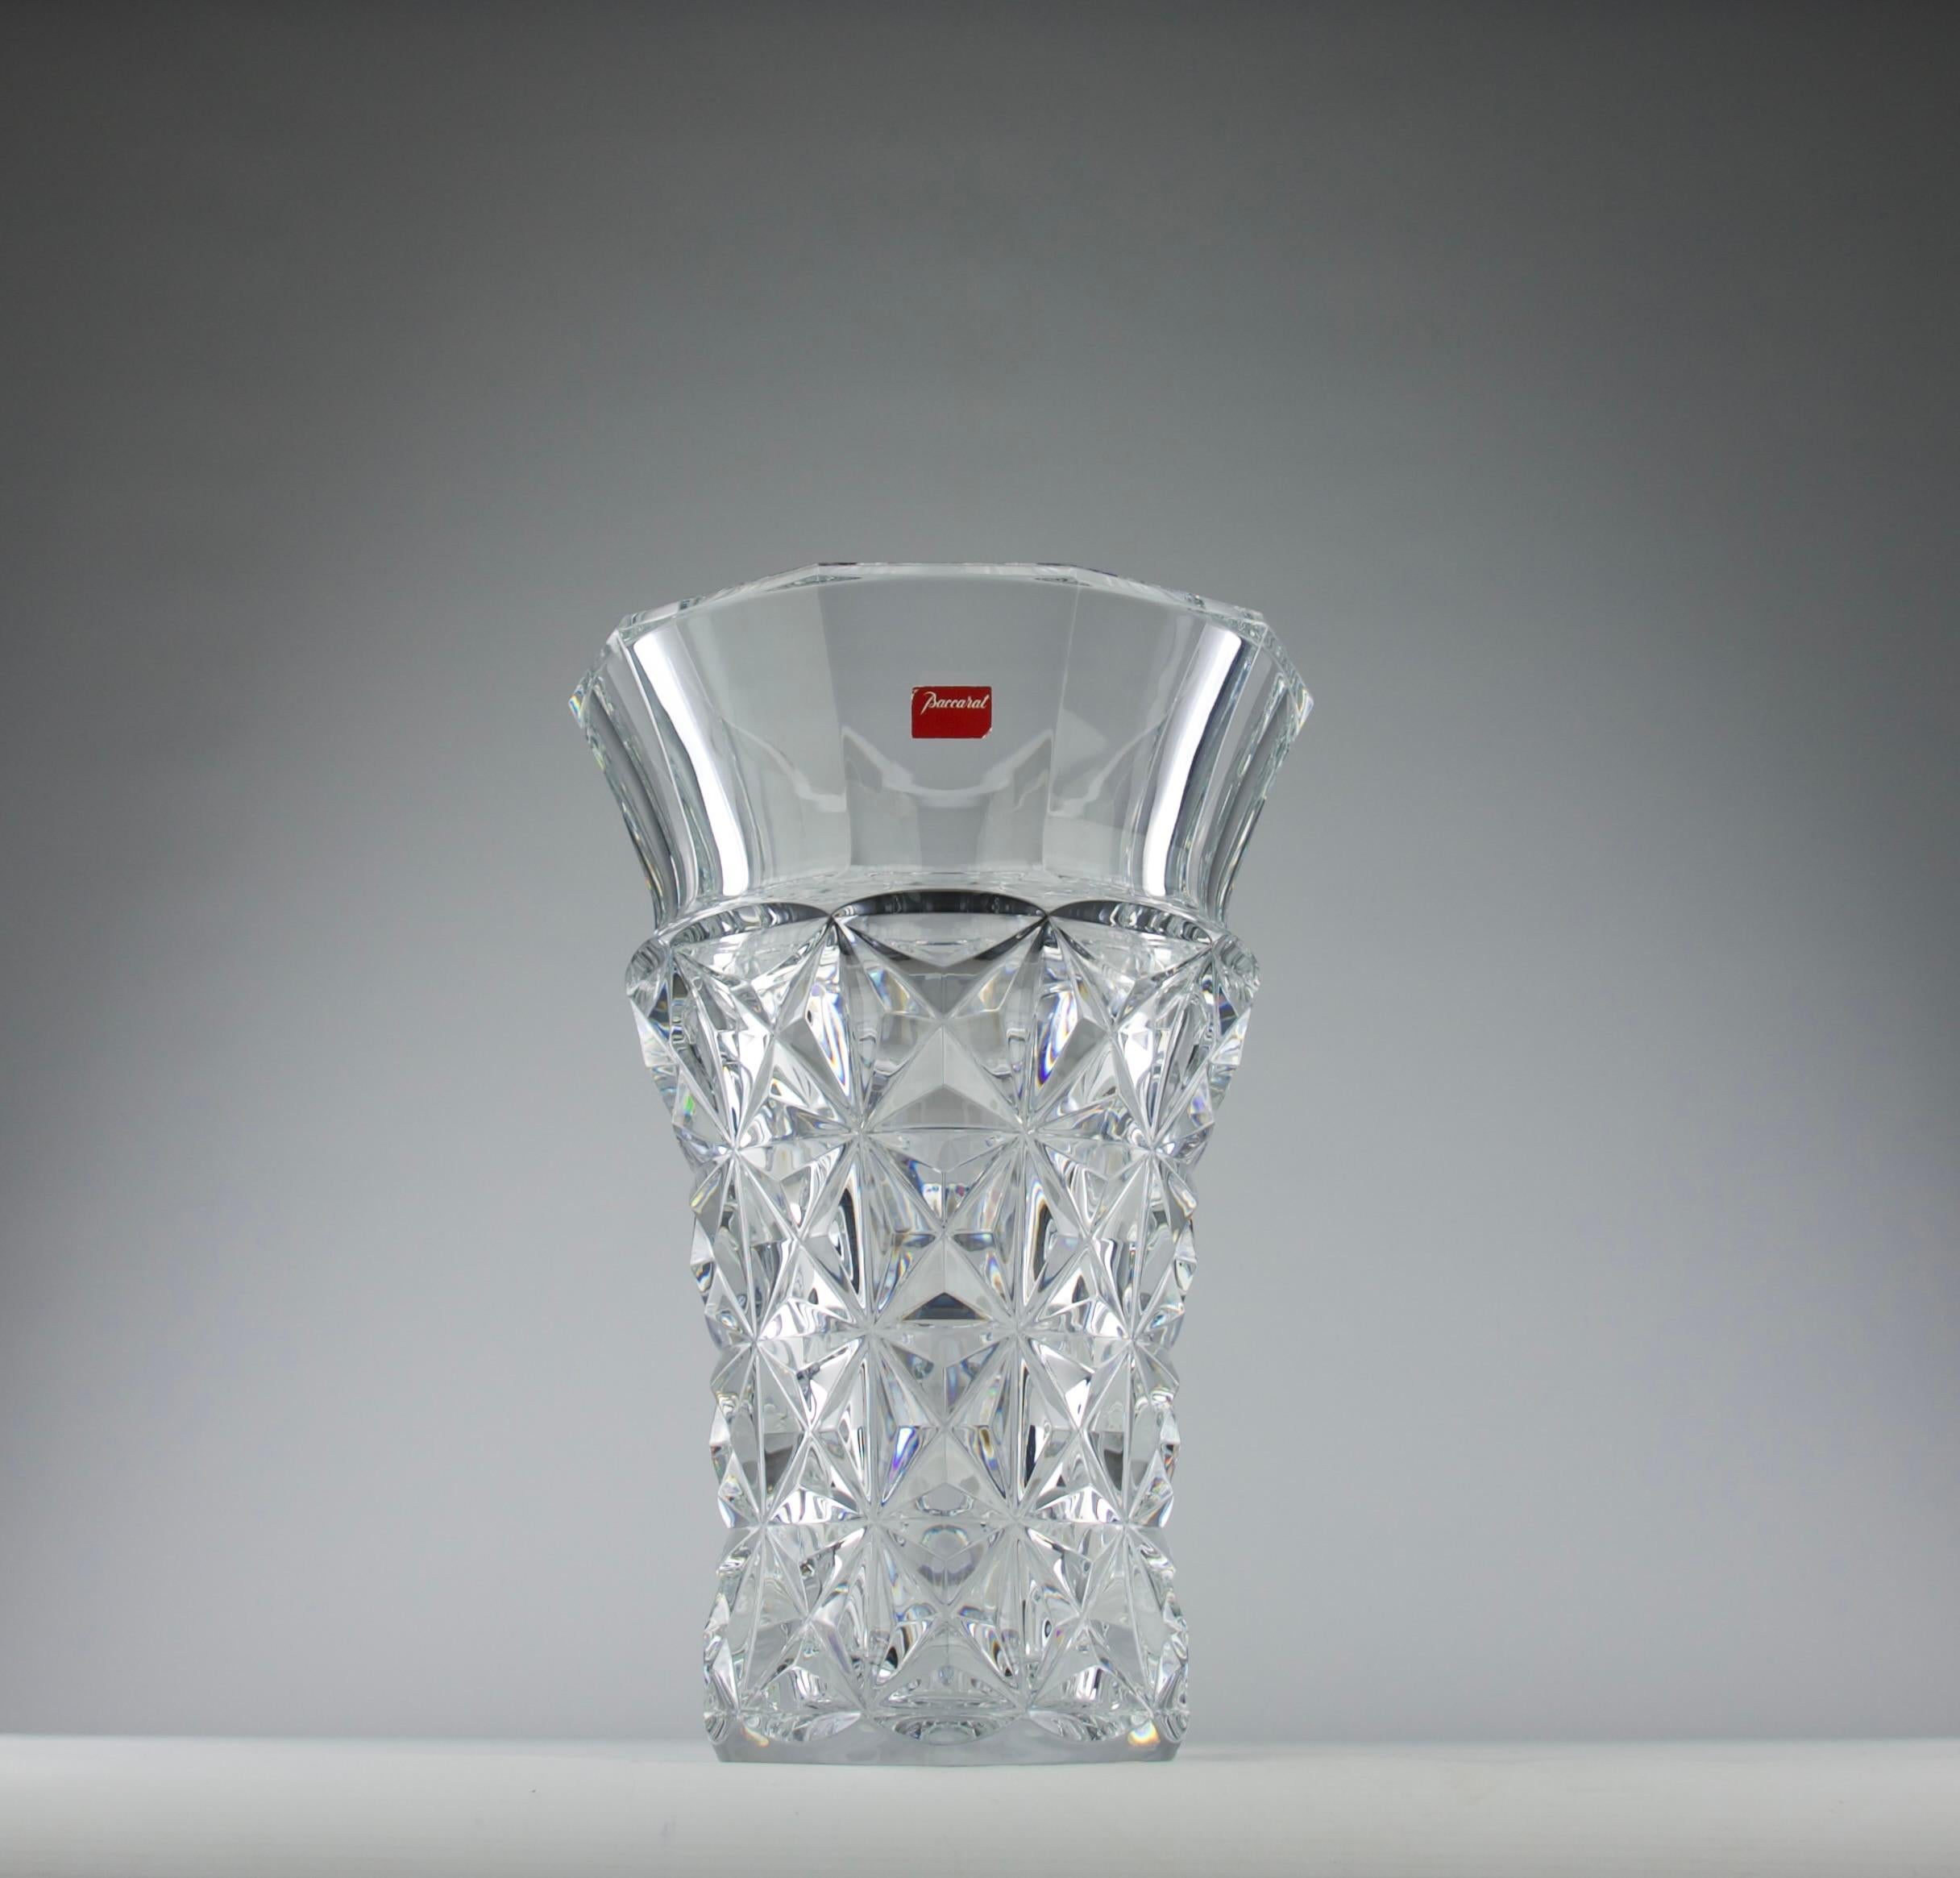 Superb Célimène crystal vase by the Baccarat manufacture. Designed by Georges Chevalier in the 1950s.

Signed and stamped by the manufacture and manufacture sticker still present on the vase.

A crystal masterpiece of exceptional proportions, the